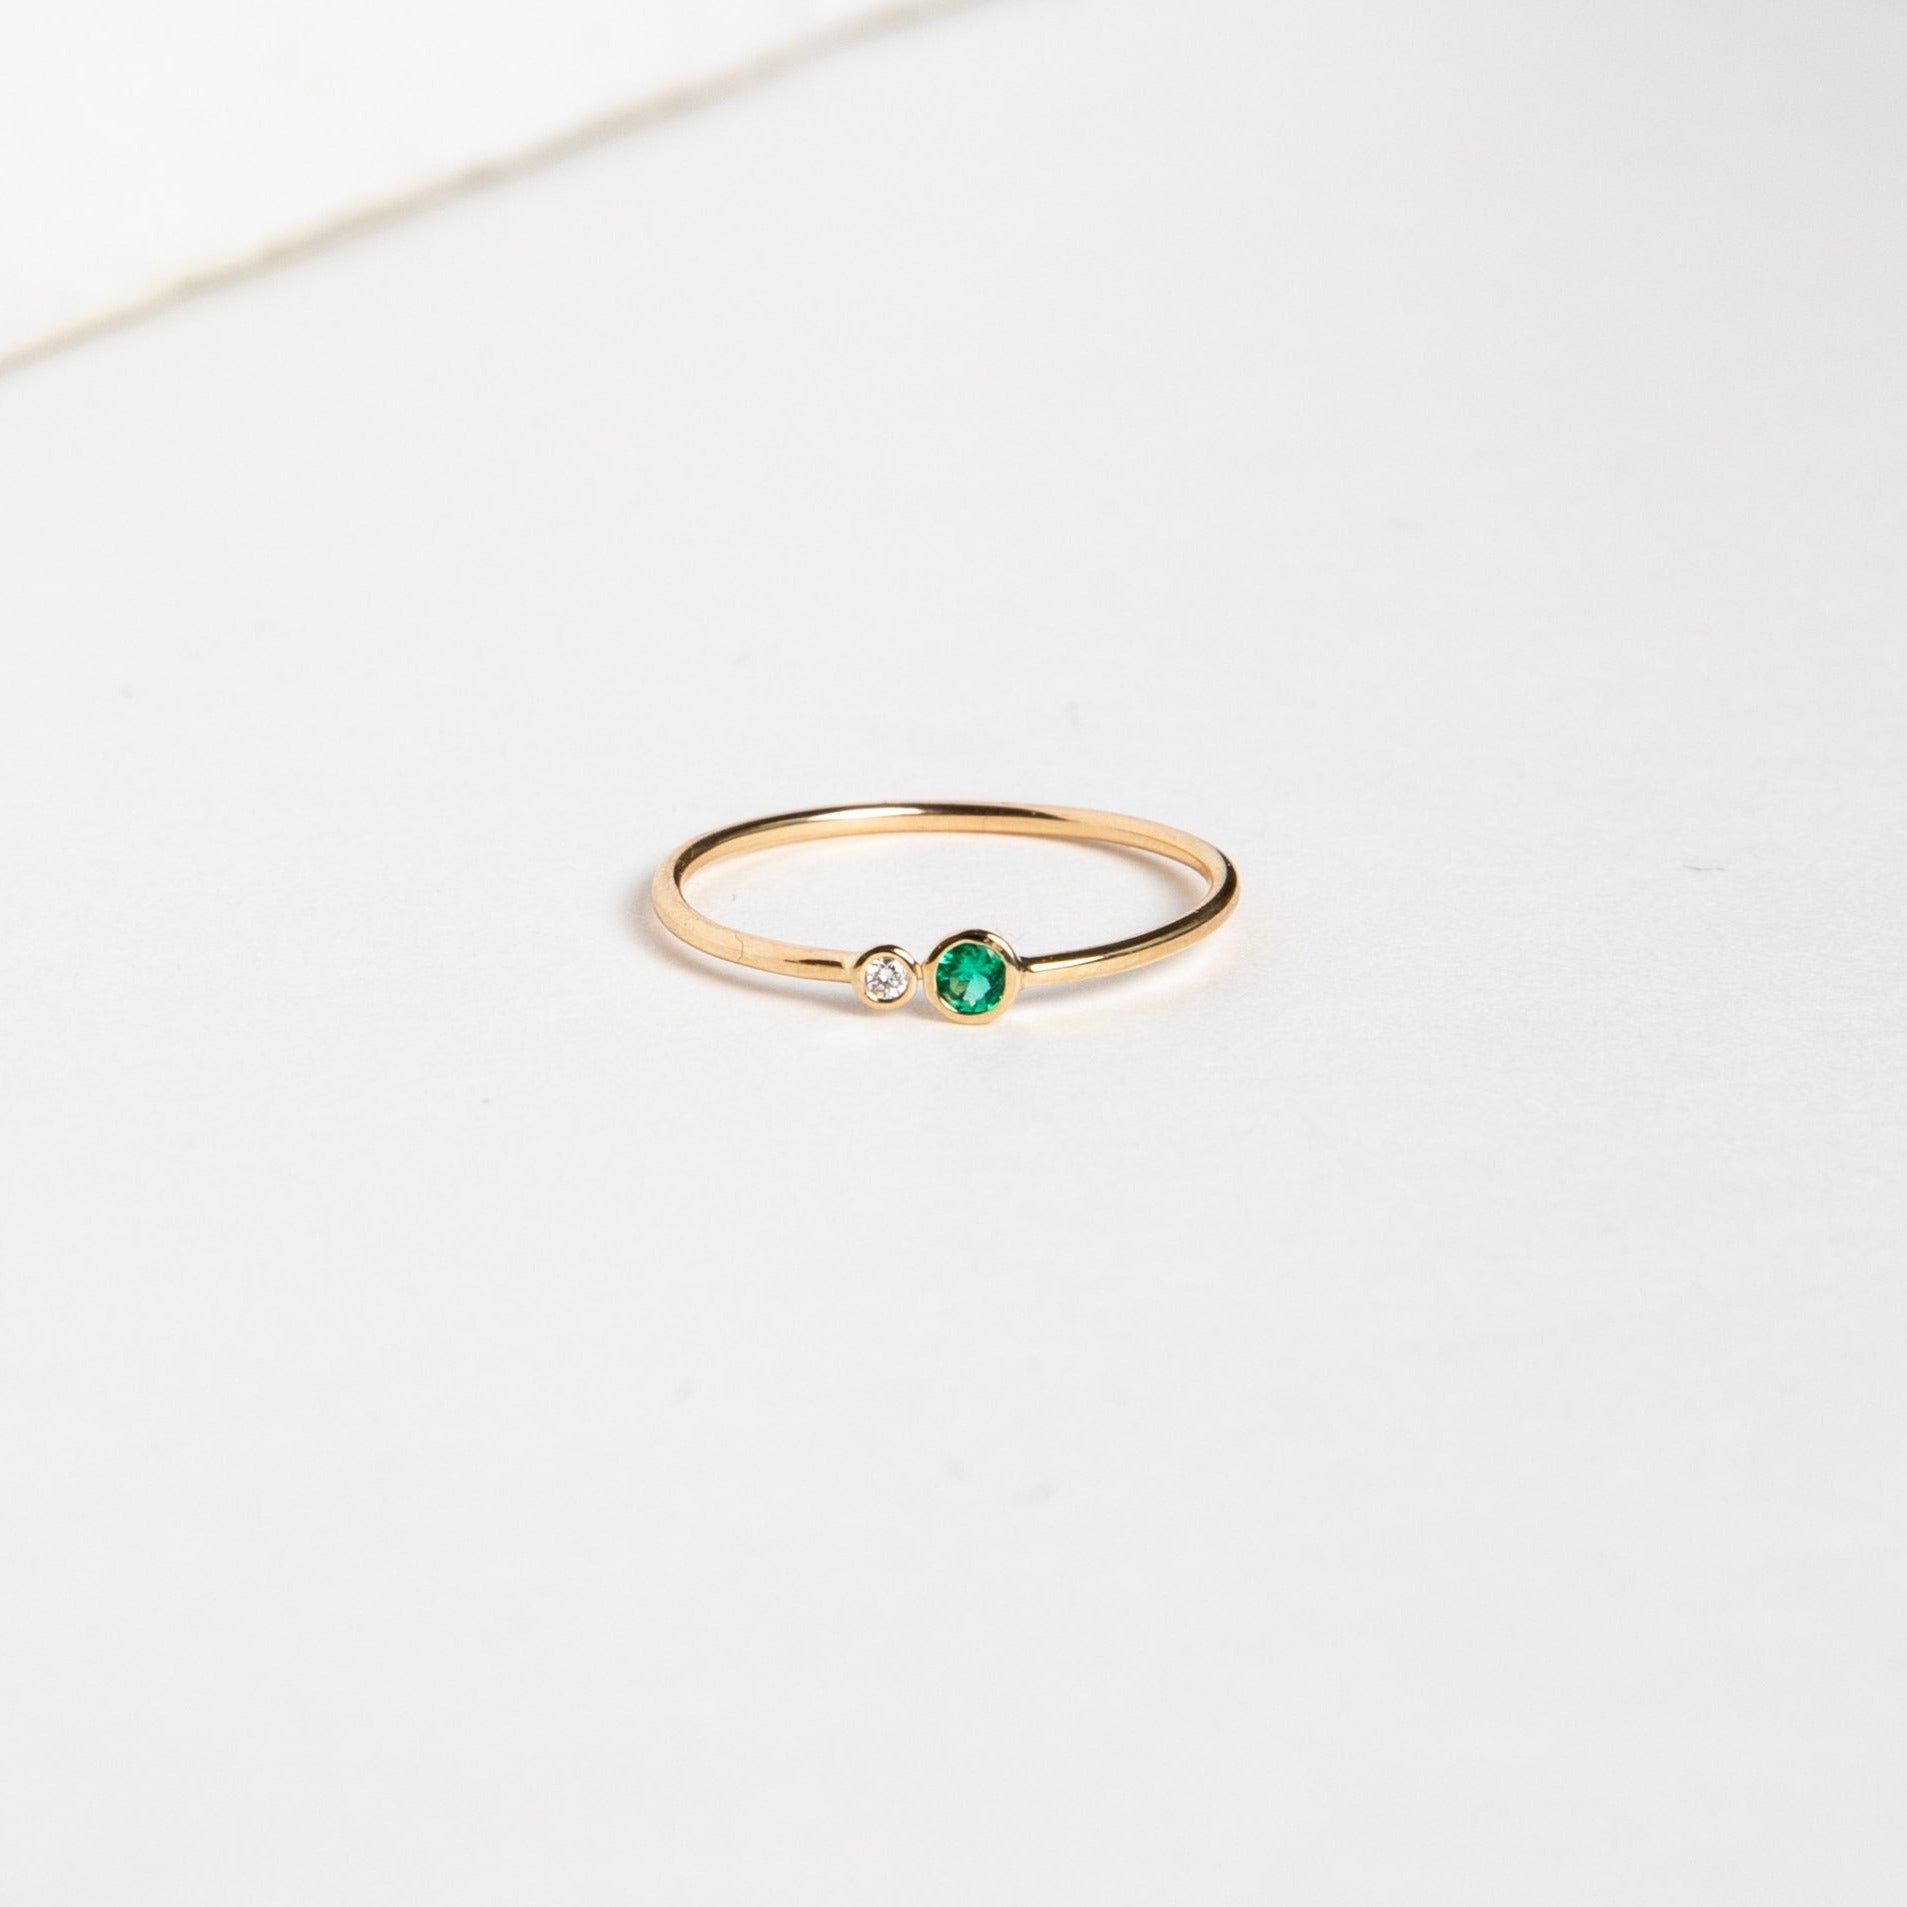 Kiki Designer Ring in 14k Gold set with Emerald by SHW Fine Jewelry New York City